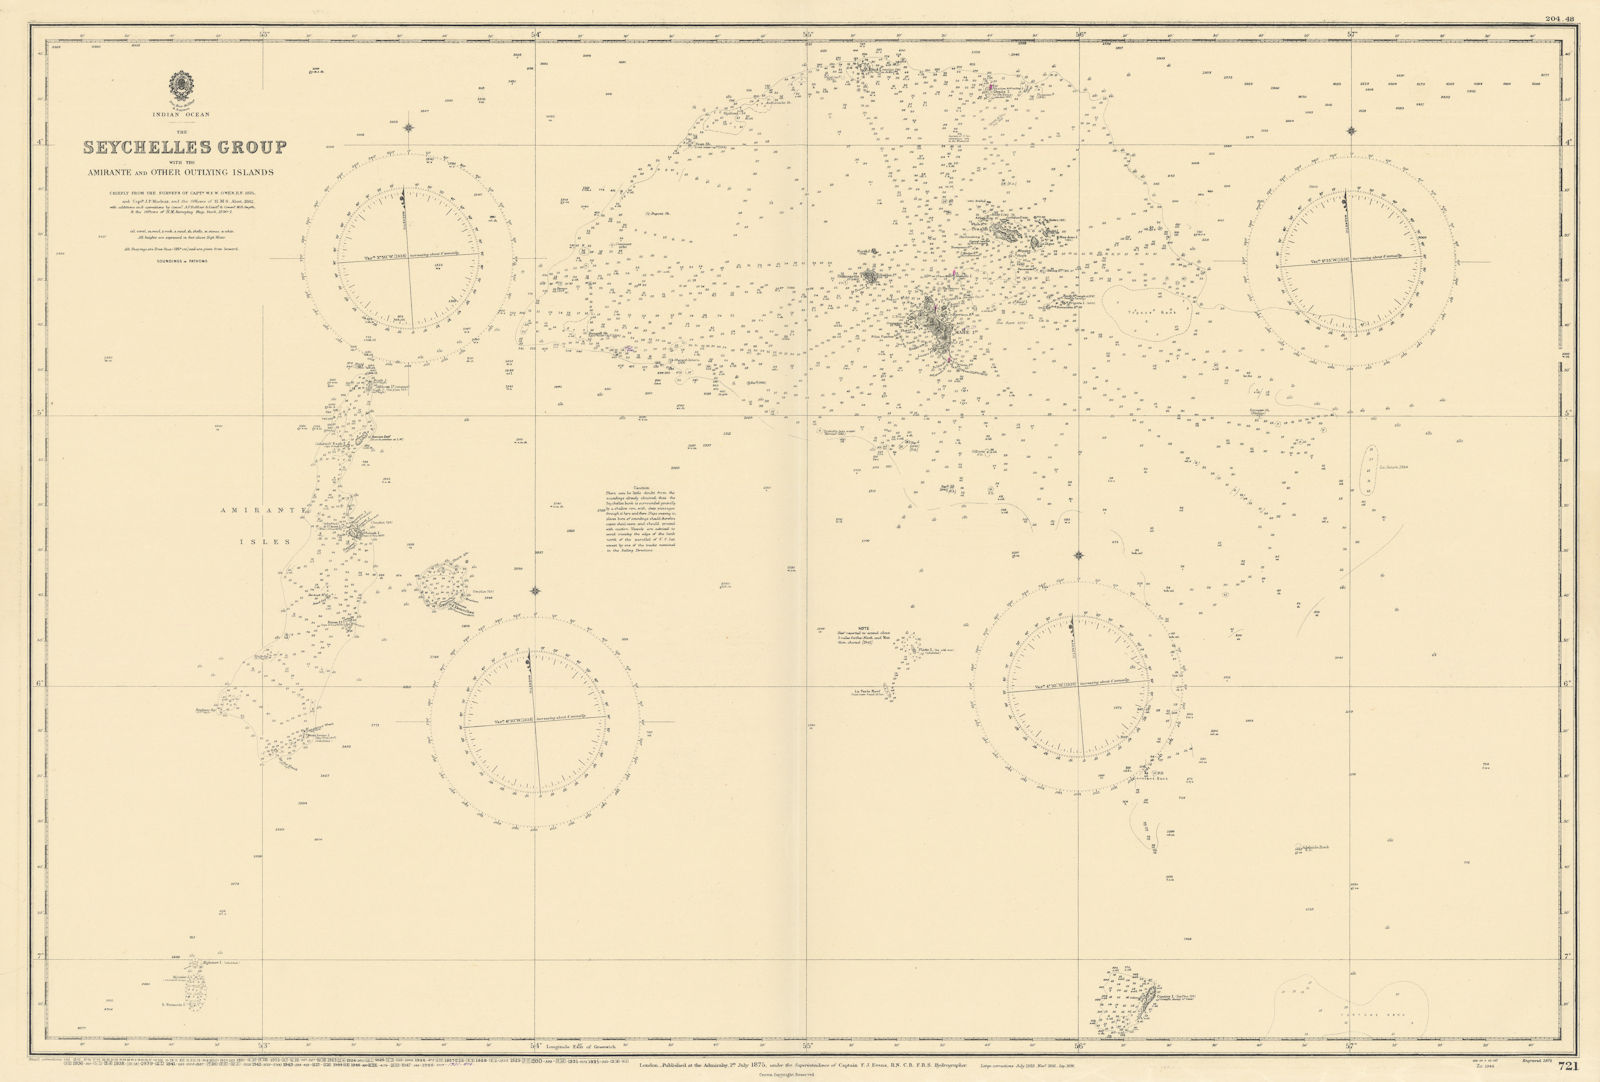 Seychelles including Amirante. Indian Ocean. ADMIRALTY sea chart 1875 (1951) map